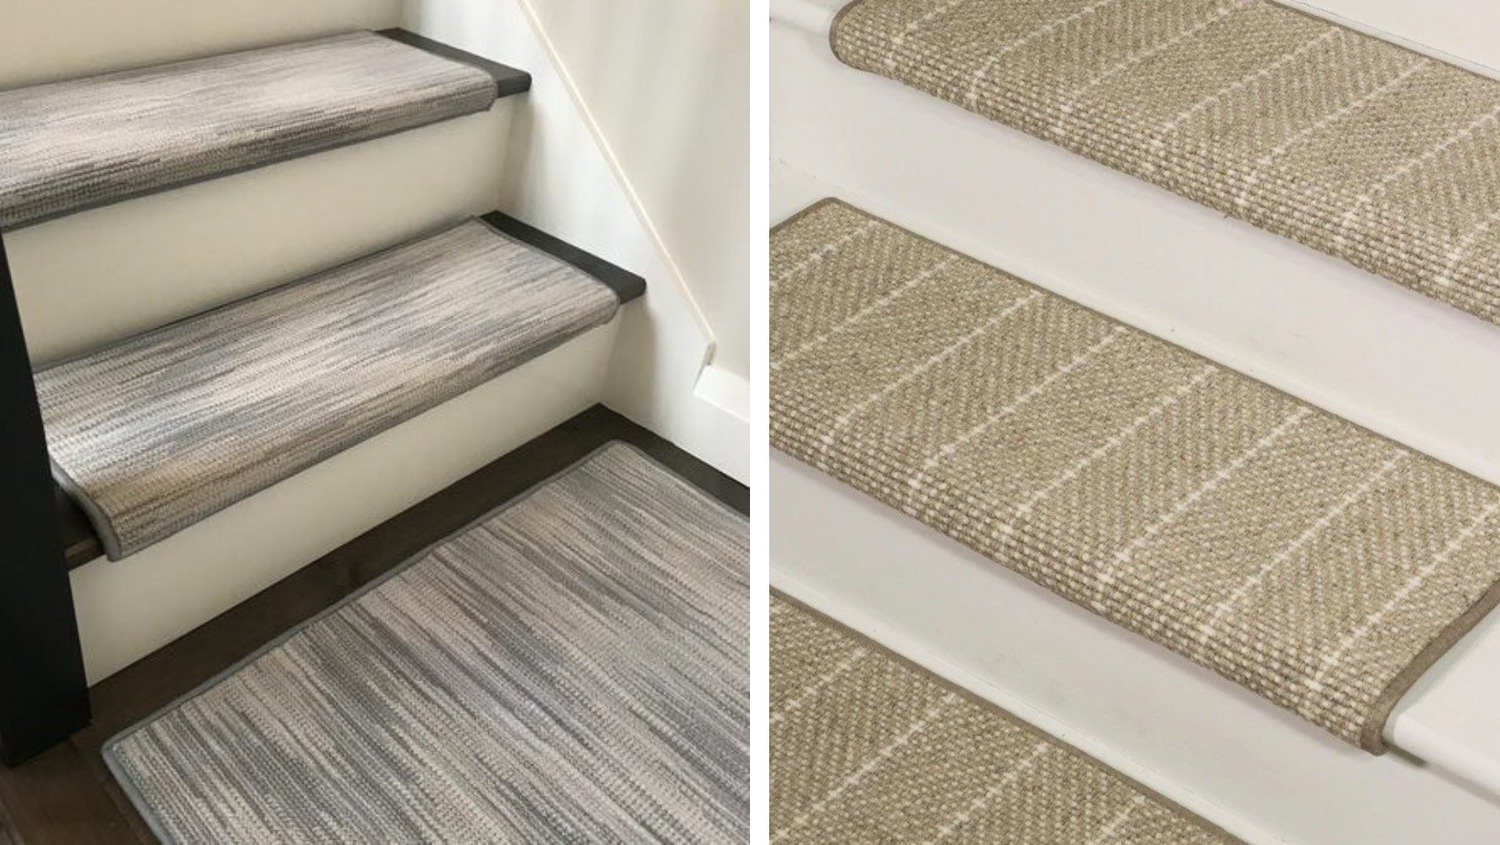 Where to Buy Individual Carpet Stair Treads?